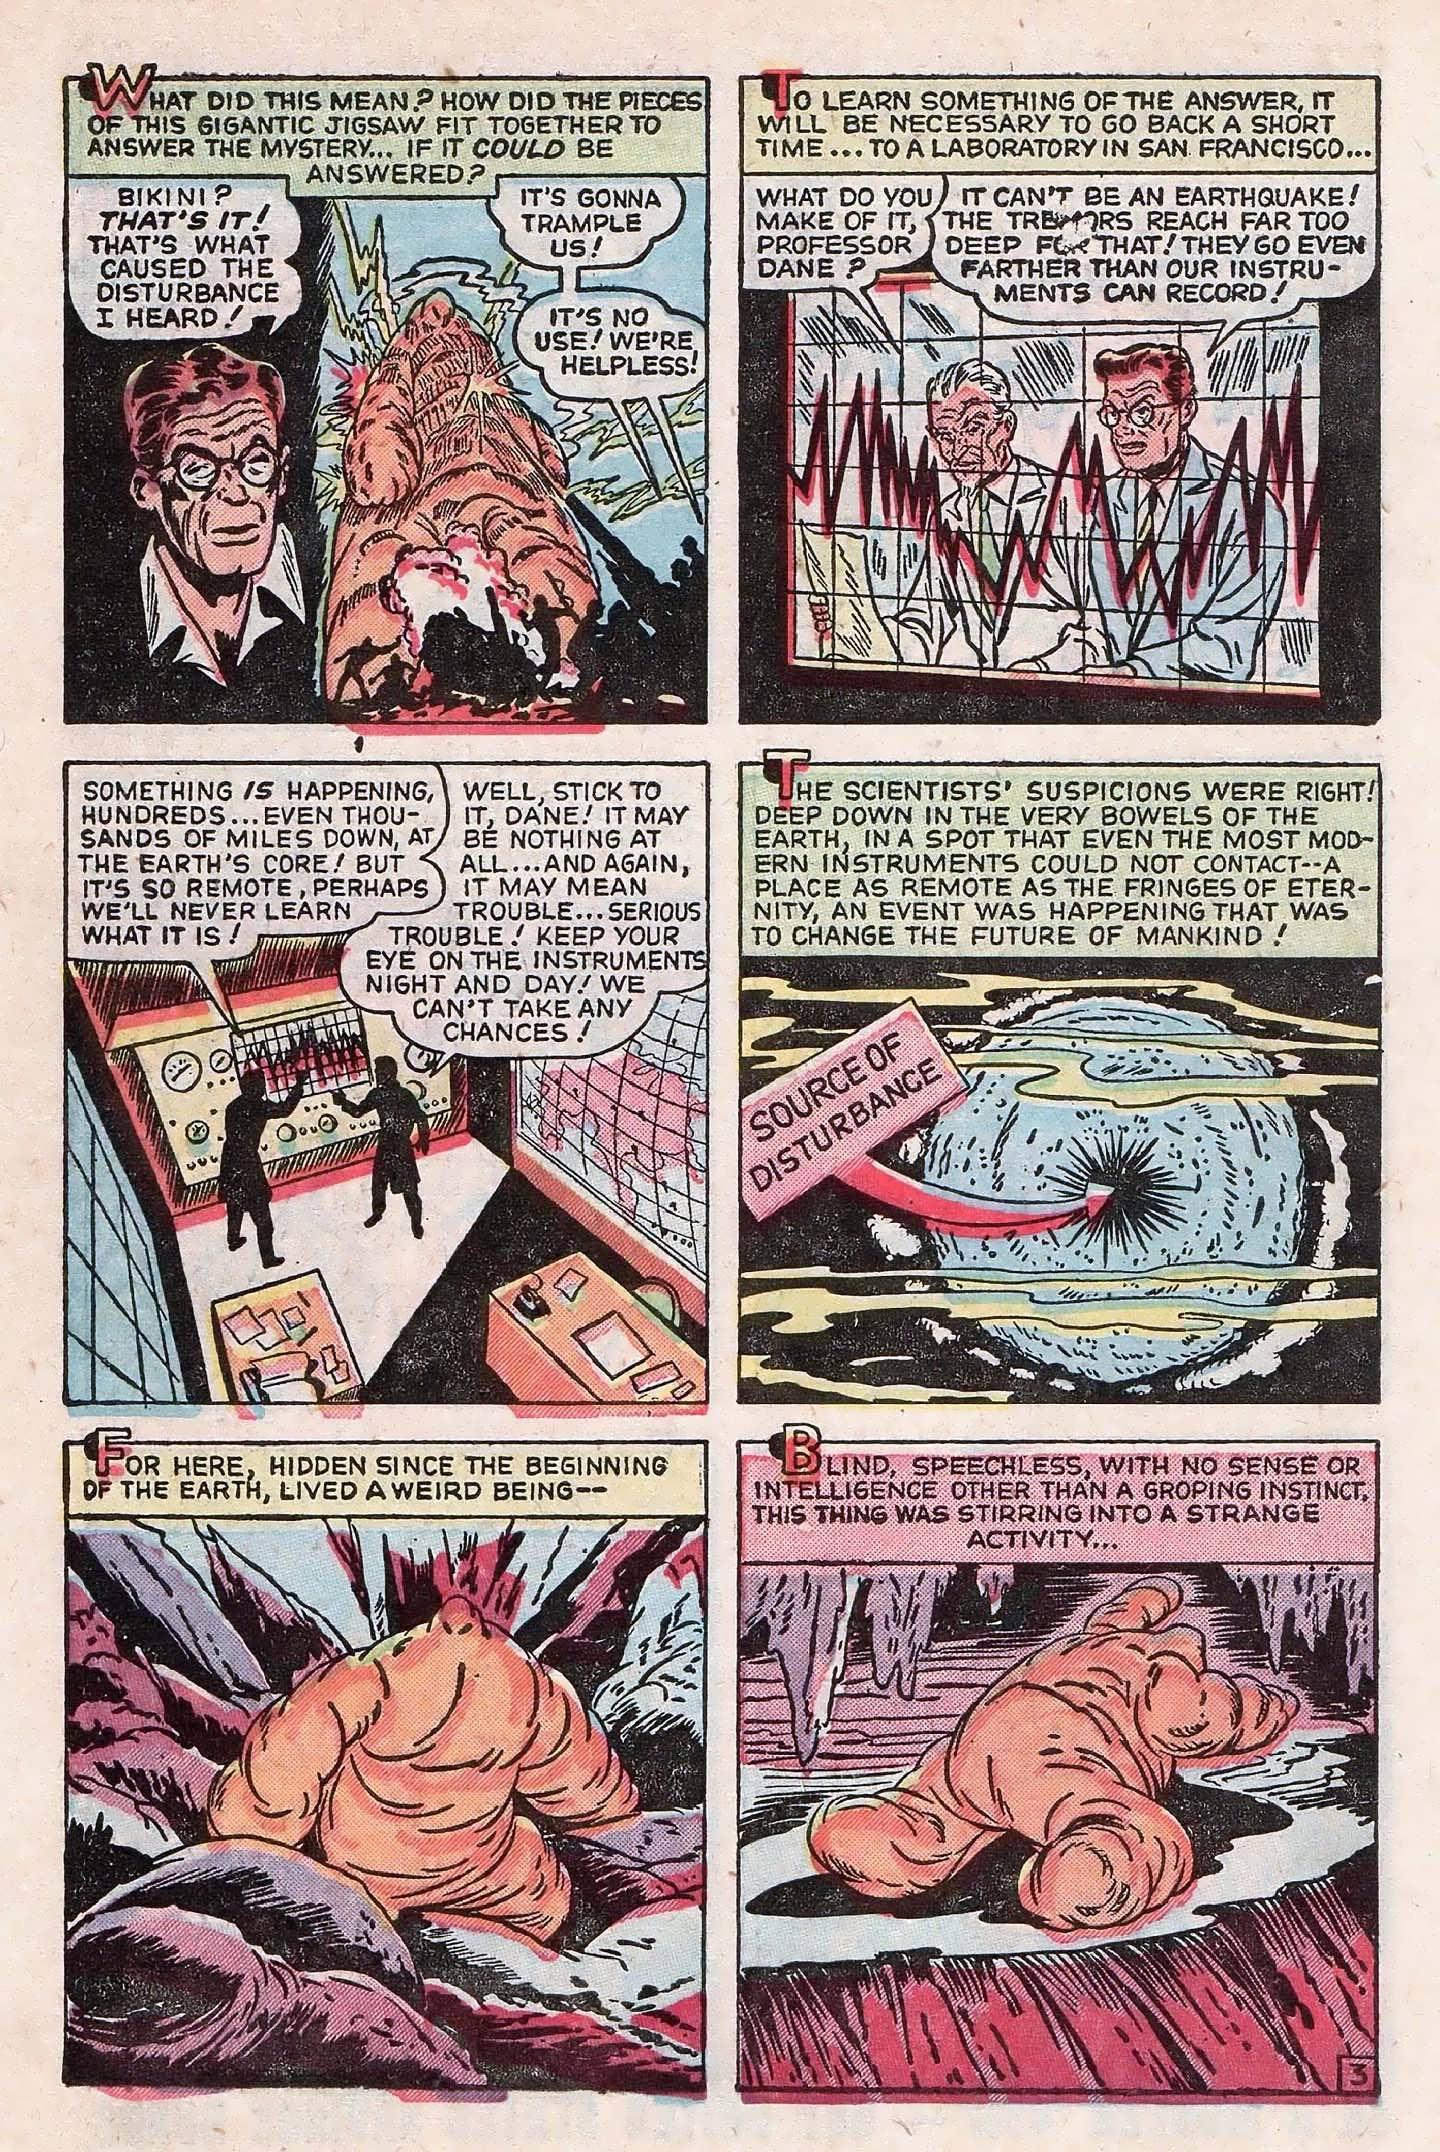 Marvel Tales (1949) 93 Page 13